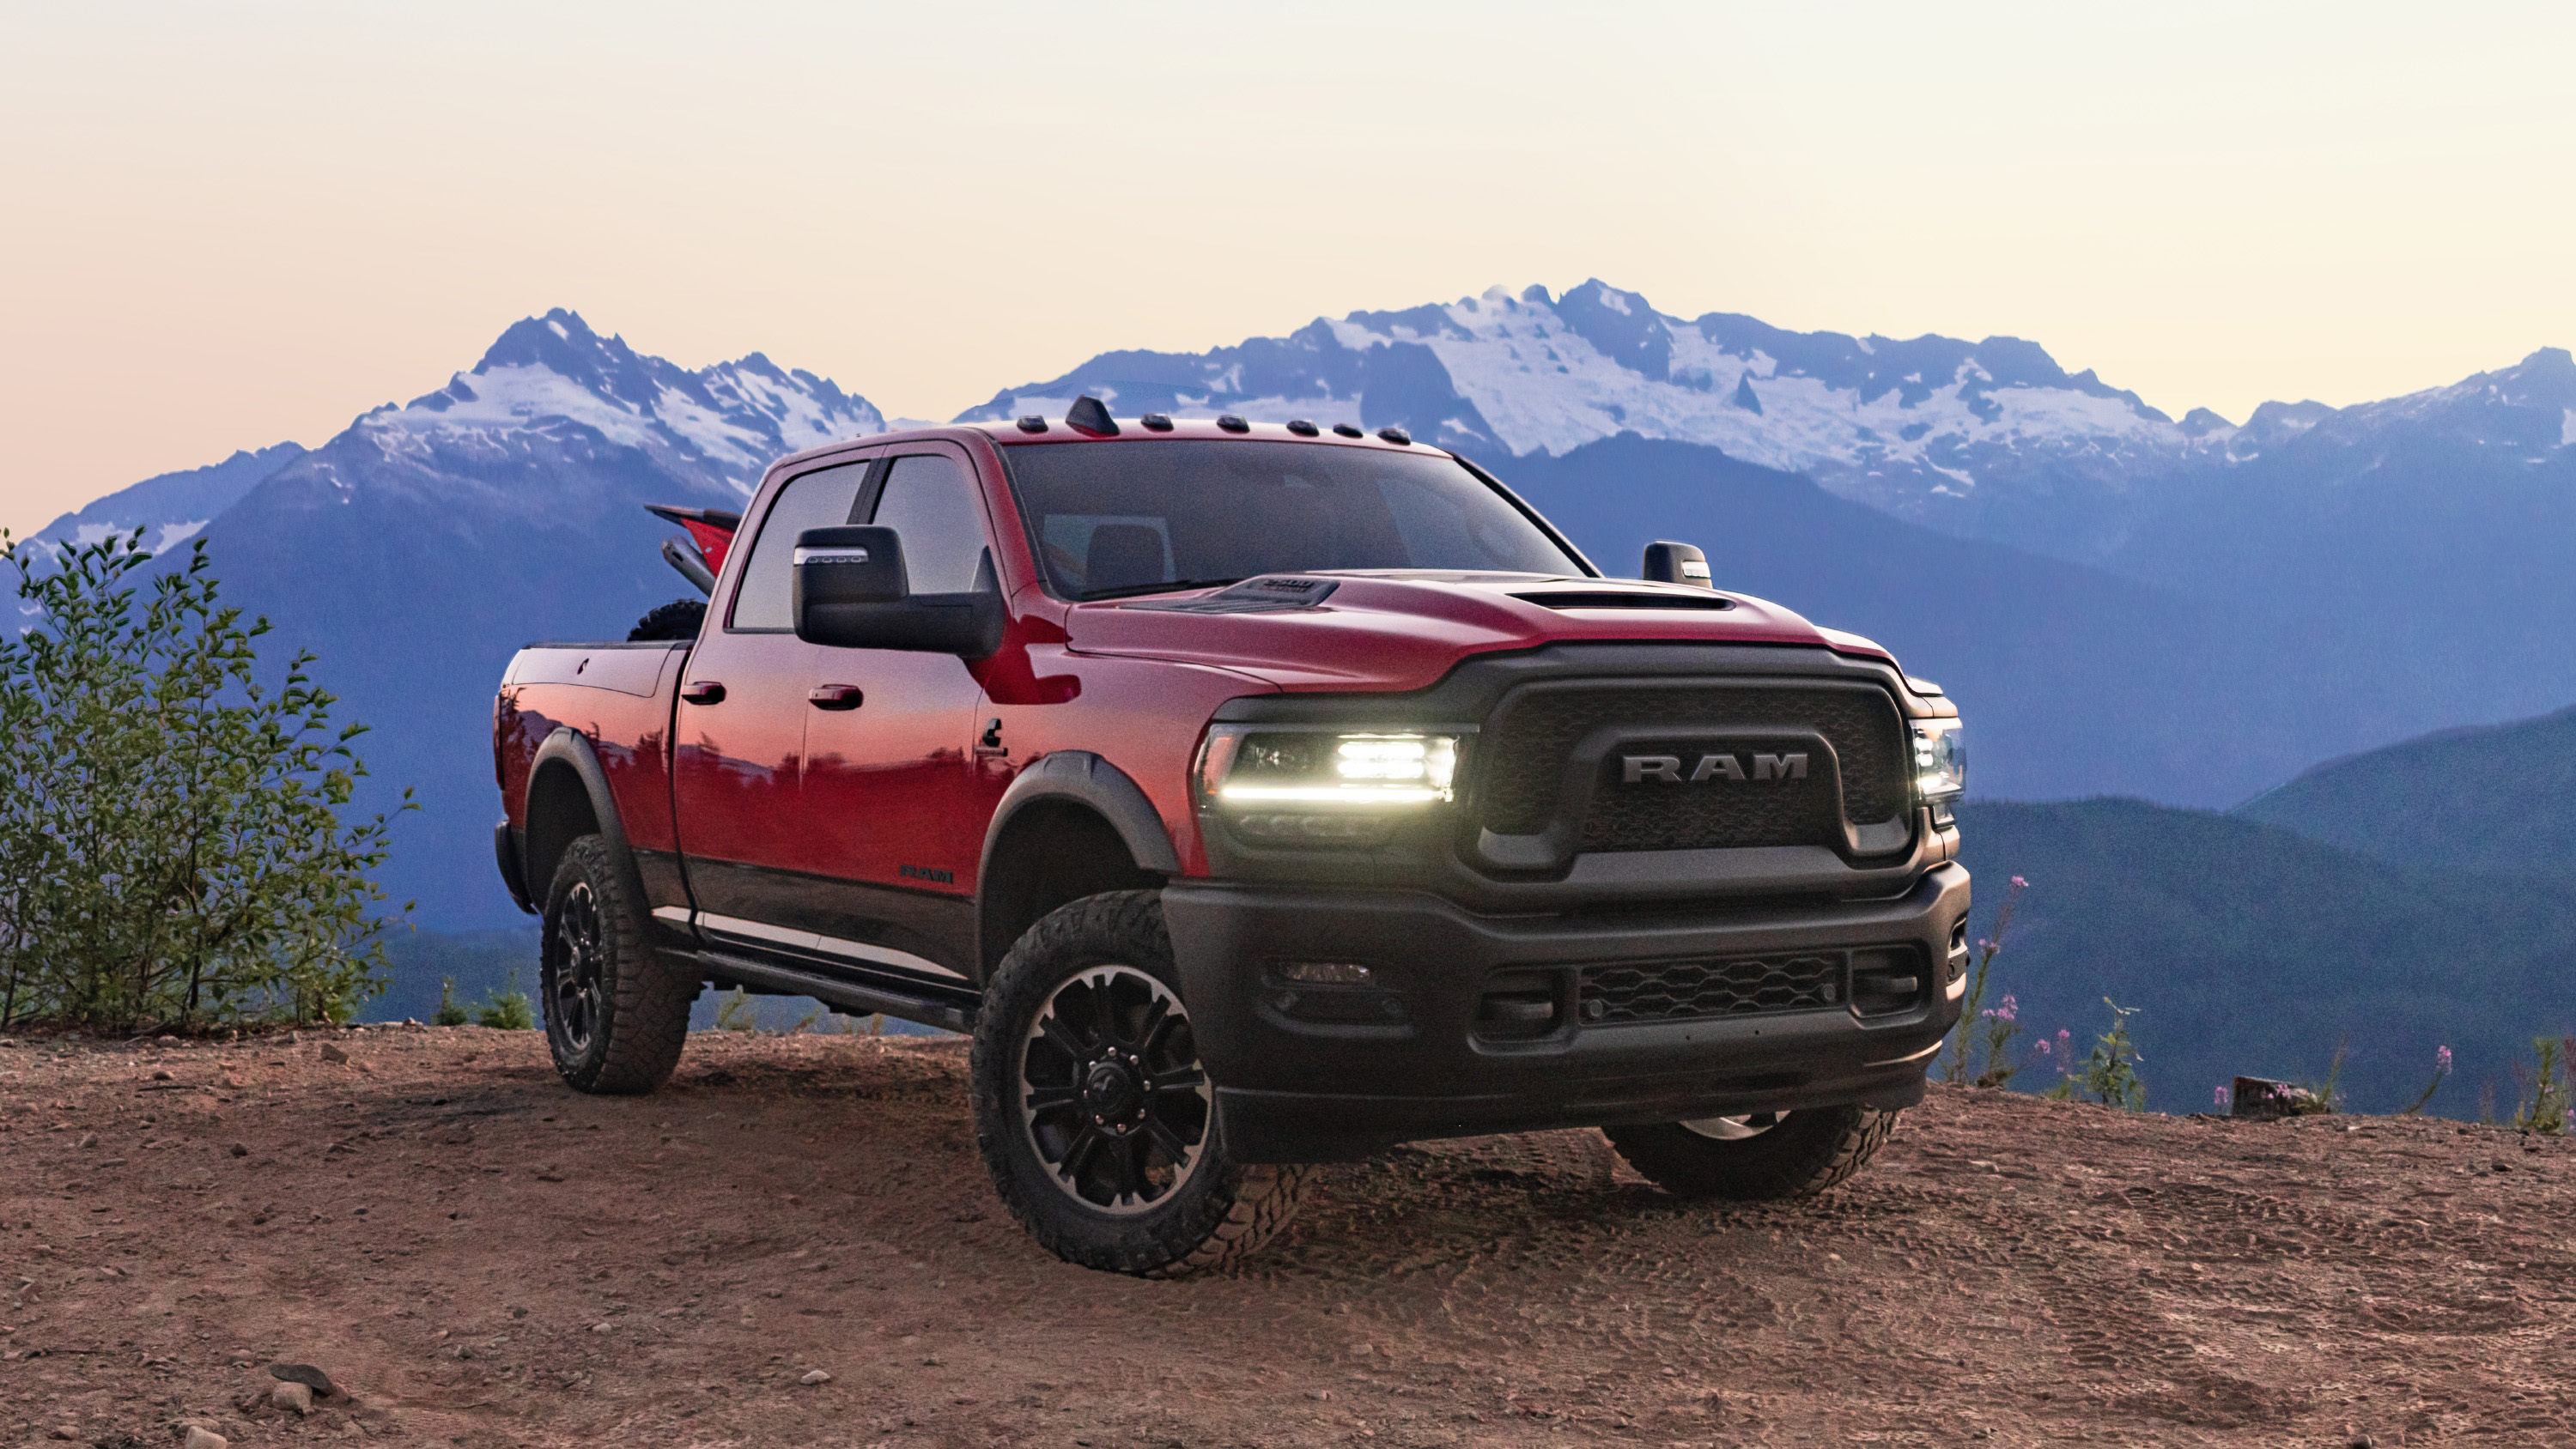 2023 Ram Rebel 2500 Hd Adds The Diesel Engine You Cant Have In The